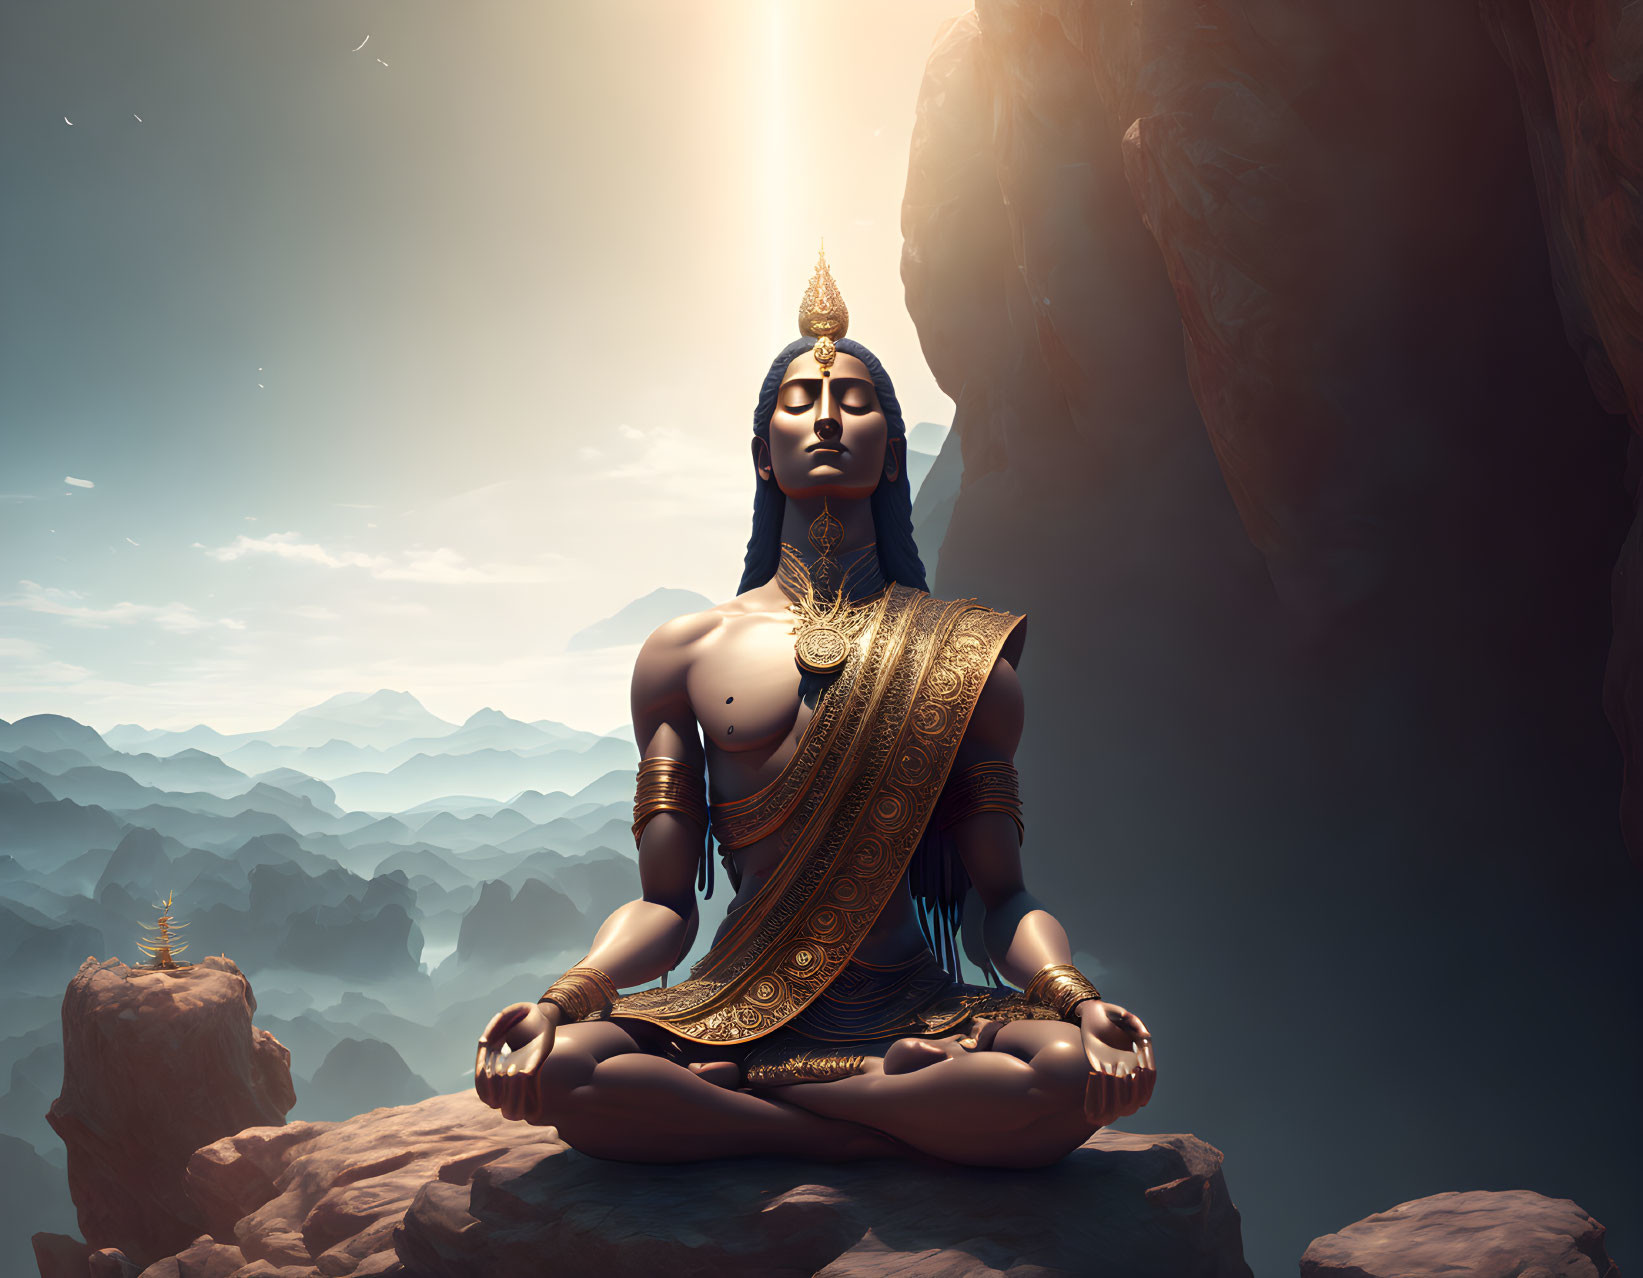 Meditative figure with multiple arms atop mountain emitting light